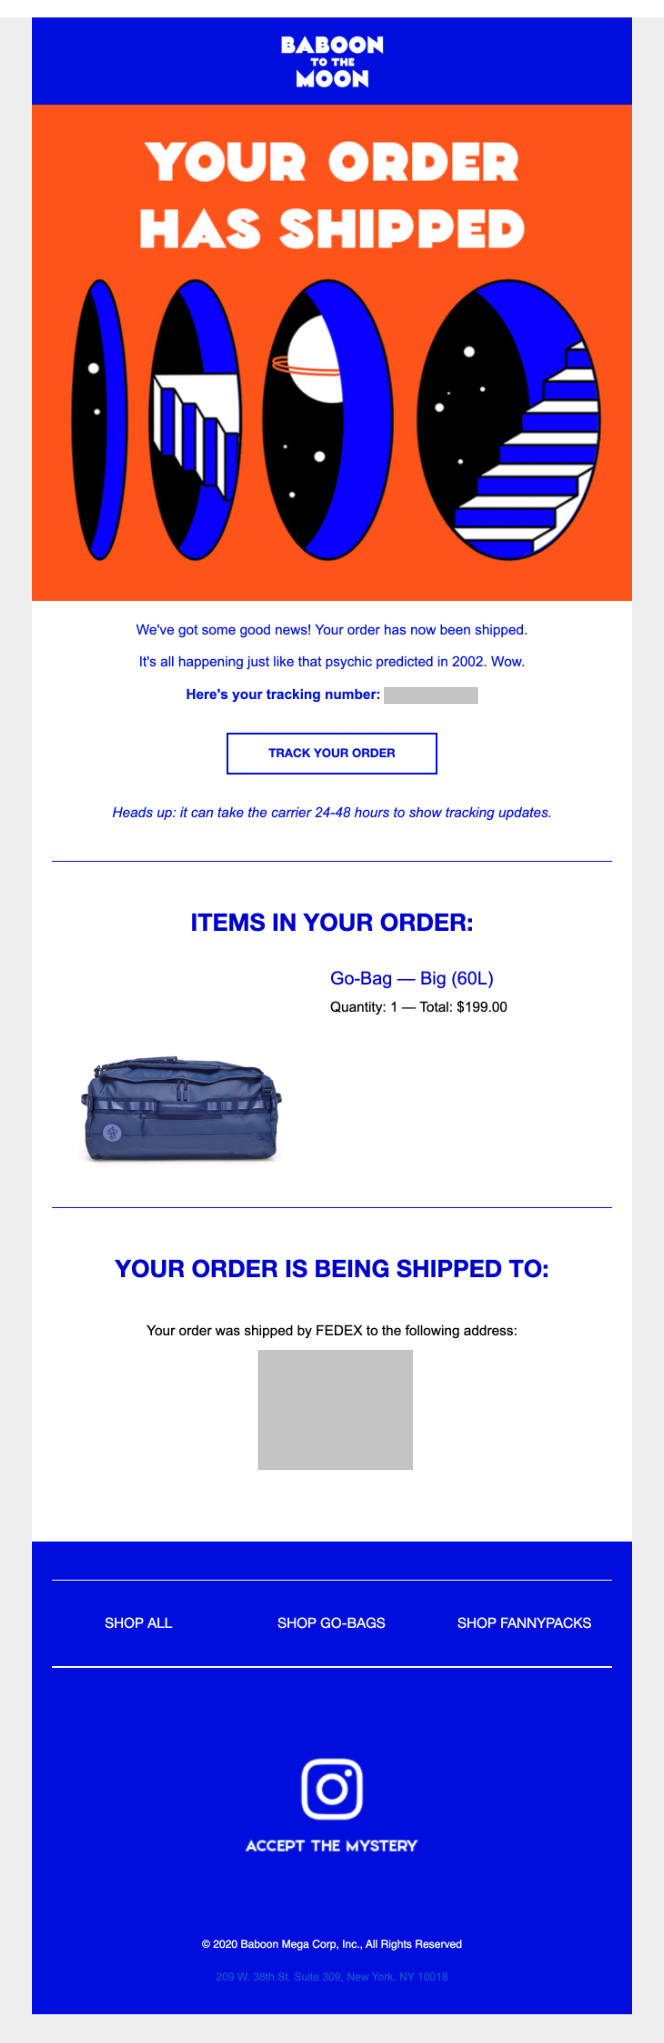 Baboon to the Moon Shipment Confirmation Apparel and Accessories Email Template 